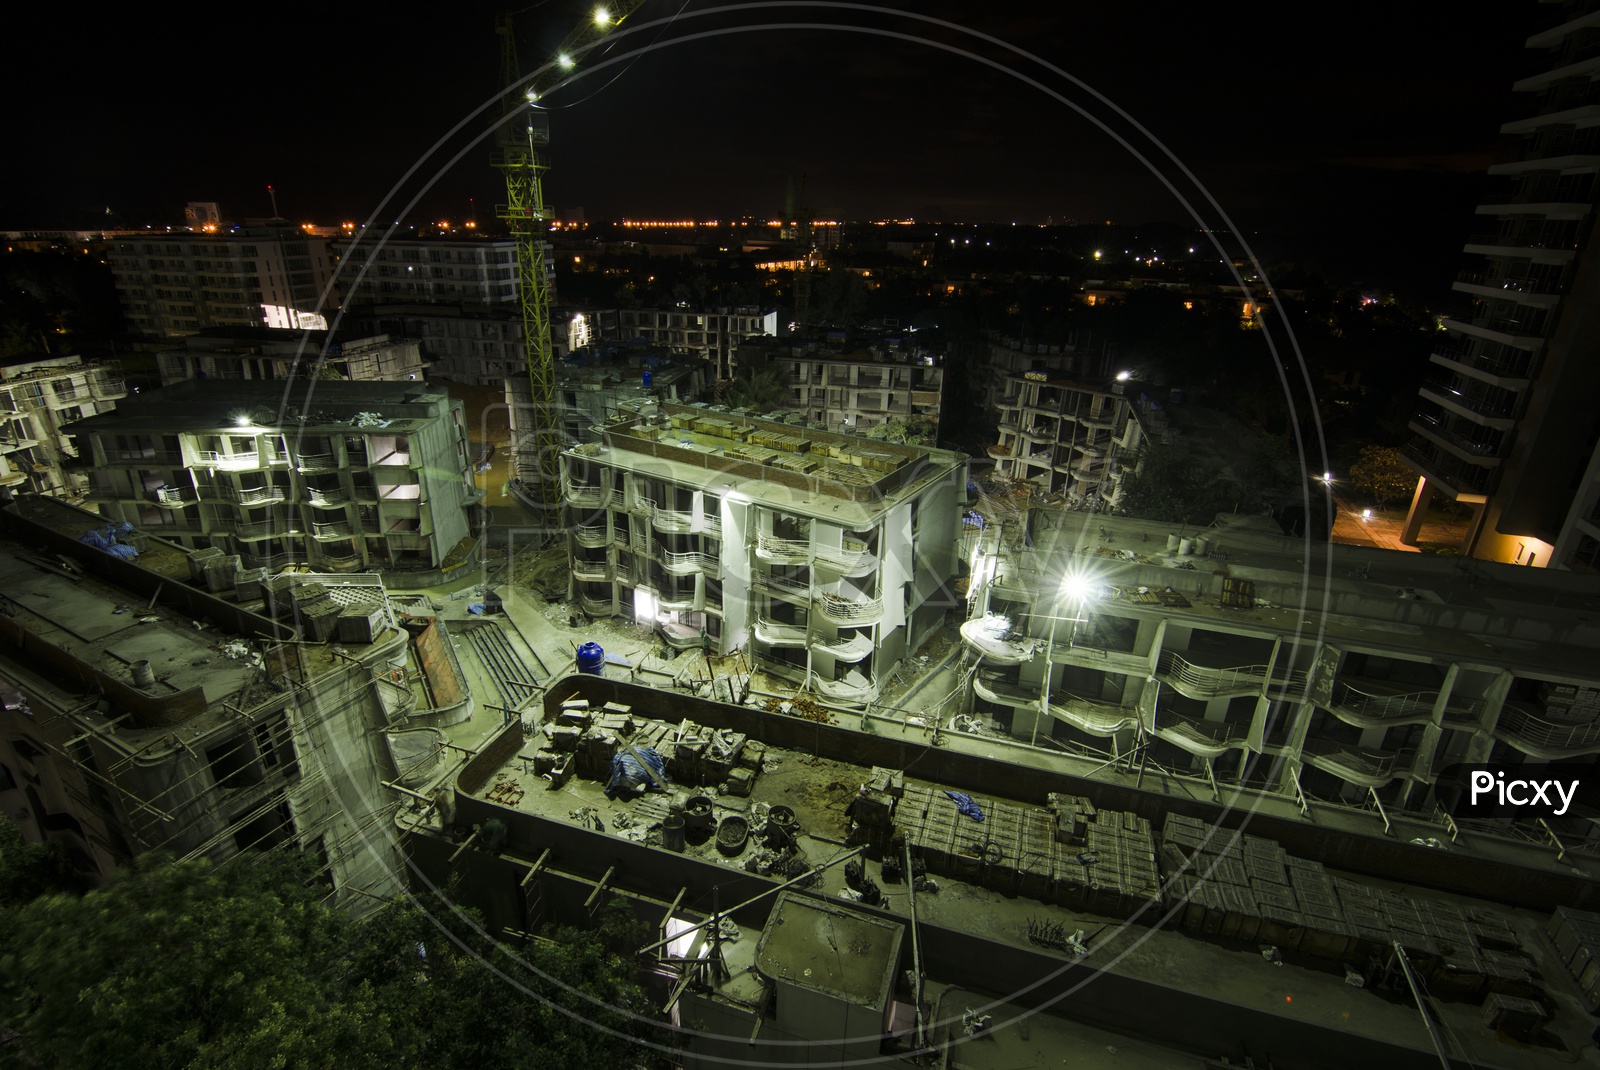 Apartments Construction in Night time in Thailand